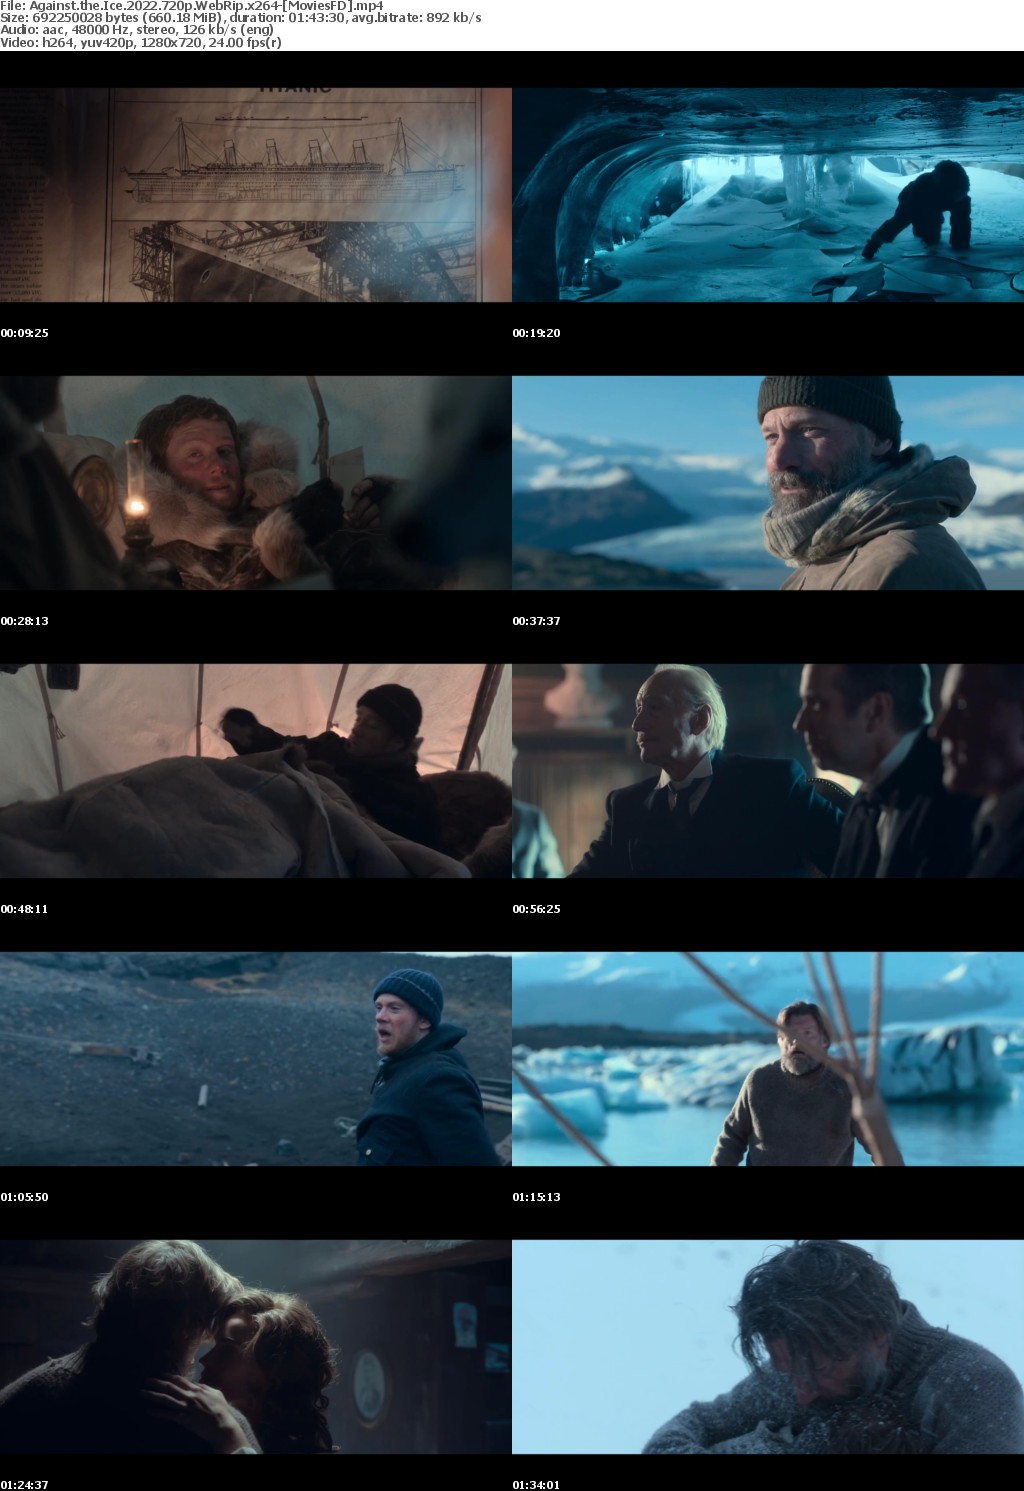 Against the Ice (2022) 720p WebRip x264 MoviesFD